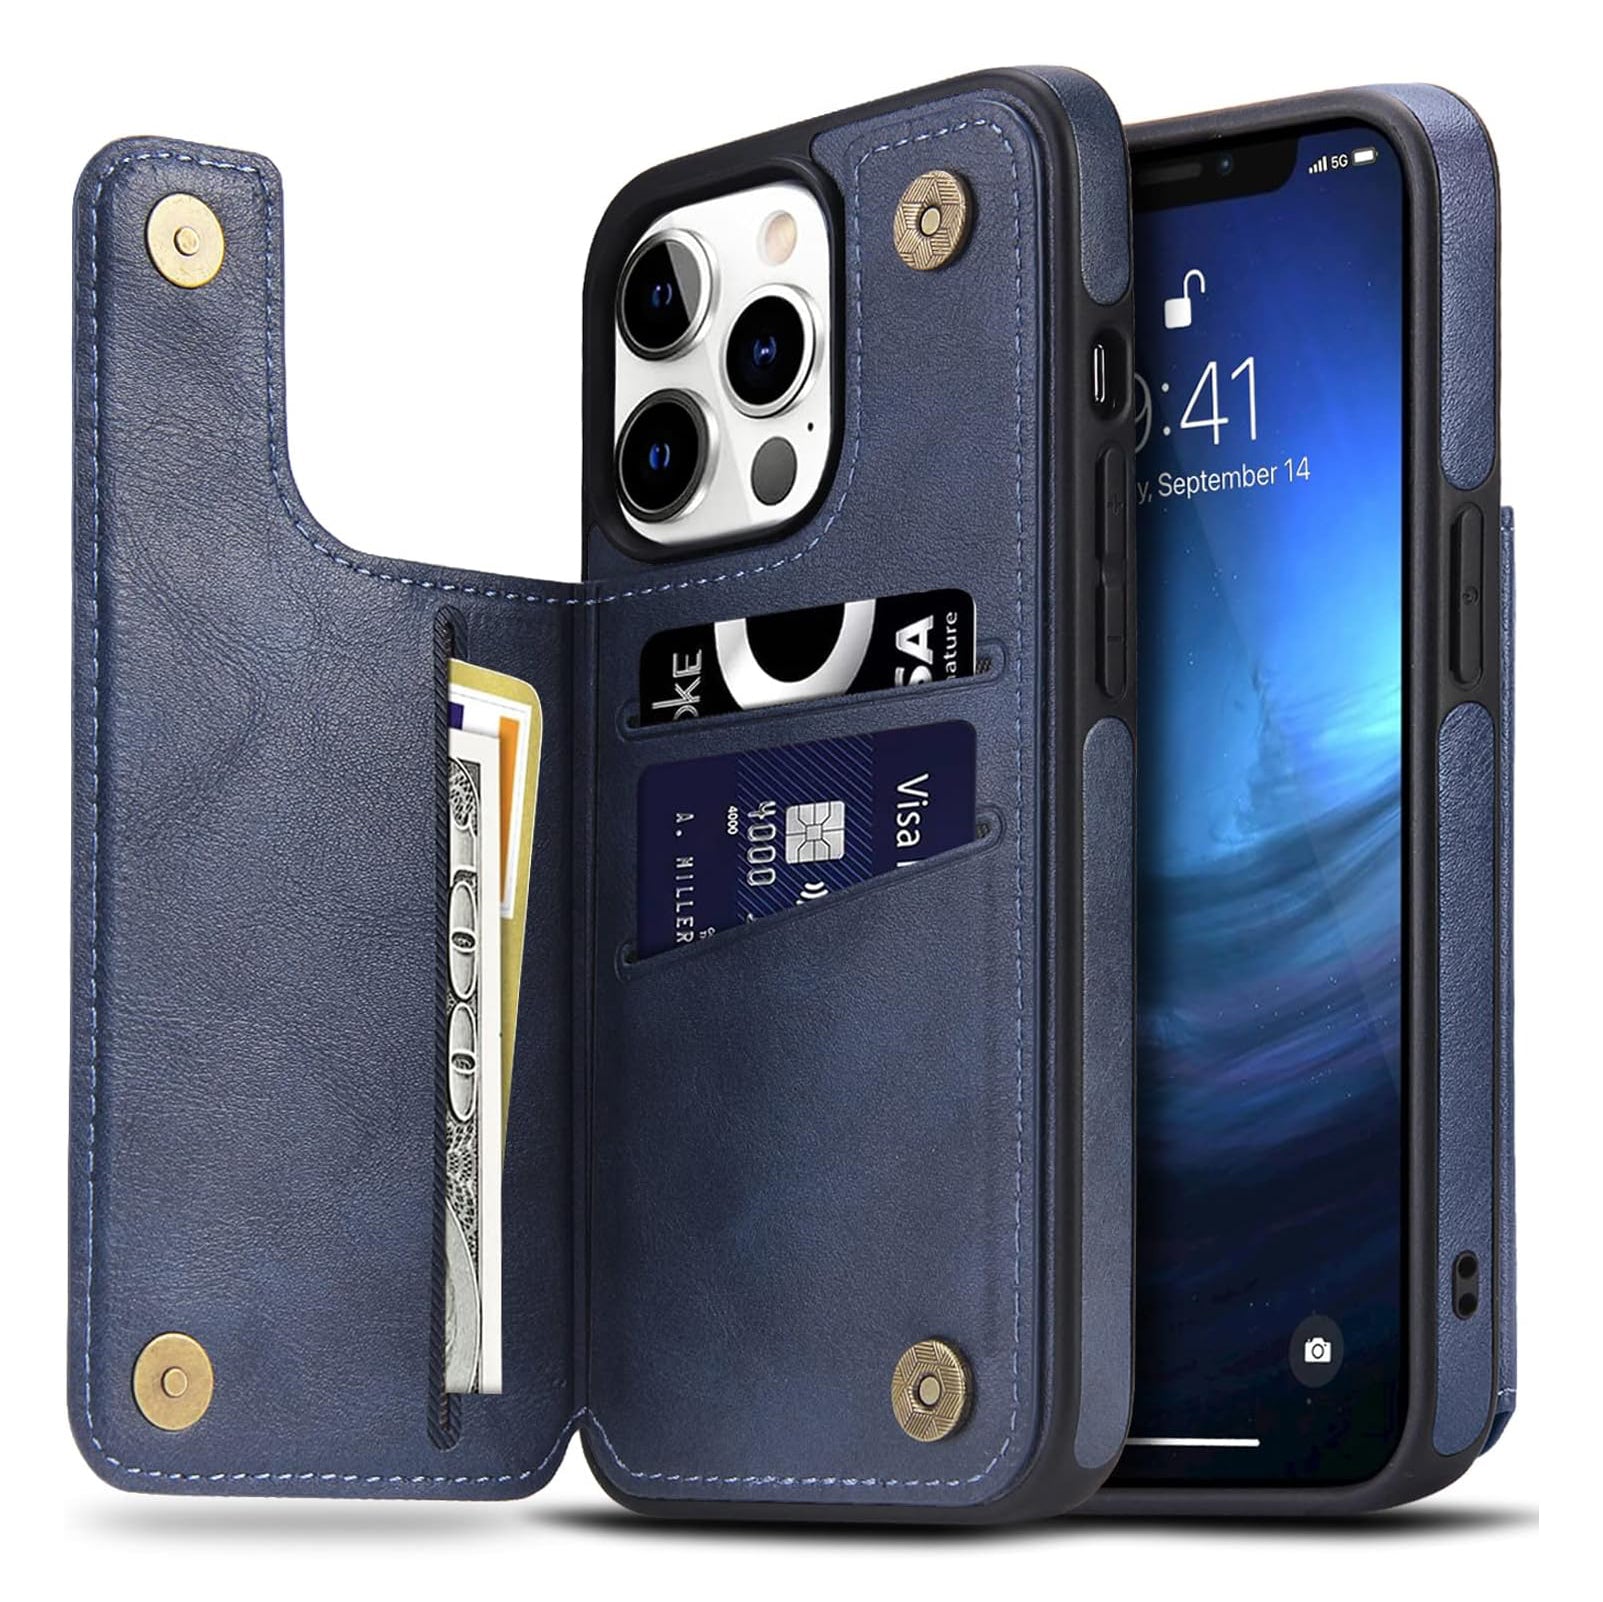 Multi-functional Protective Vegan Leather Wallet Case with Multiple Card Slots for iPhone